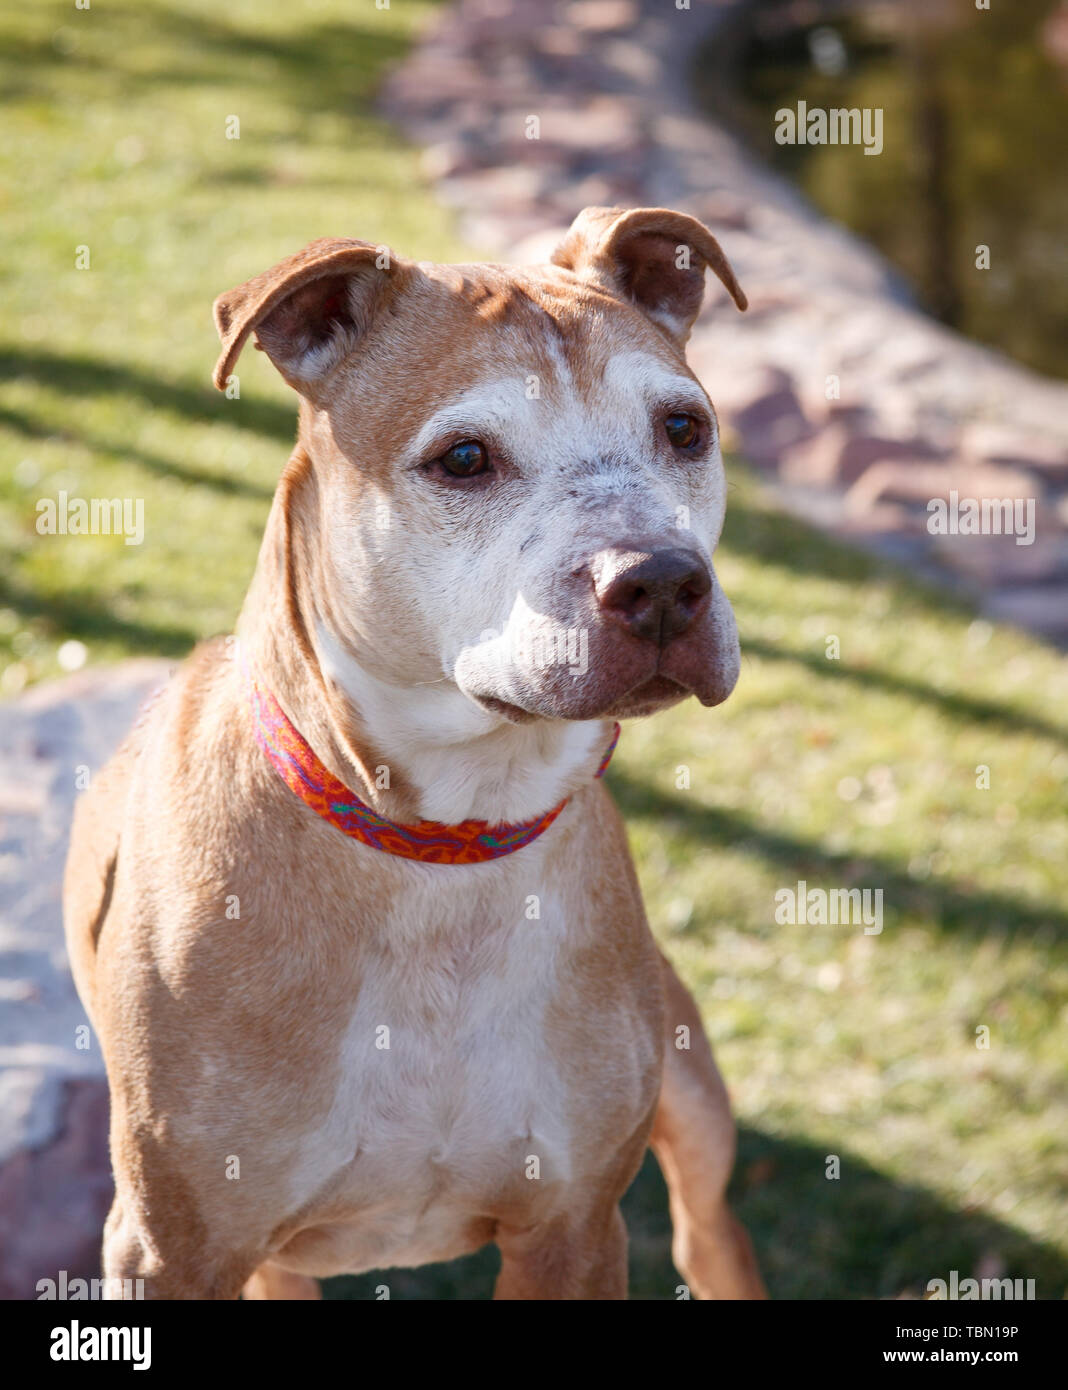 A white faced older pit bull dog at the park posing for a portrait Stock Photo